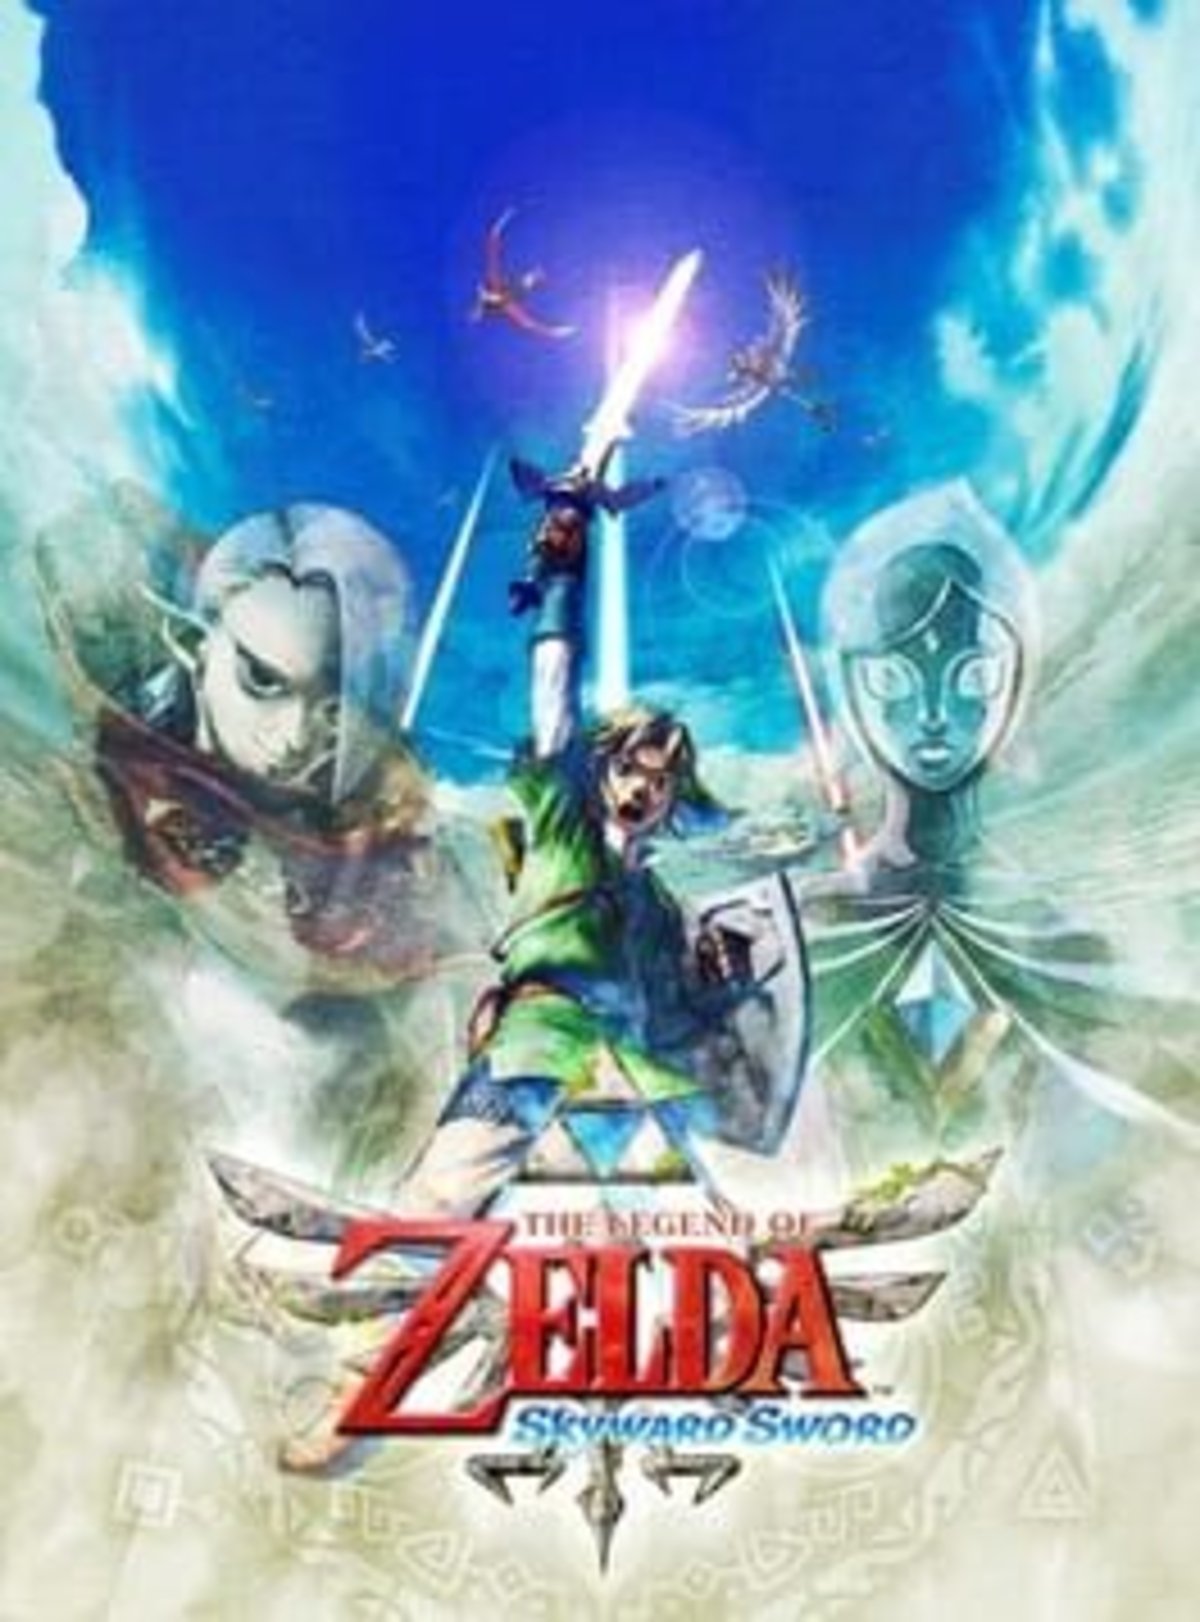 Skyward Sword HD shows Link's rise in new trailer